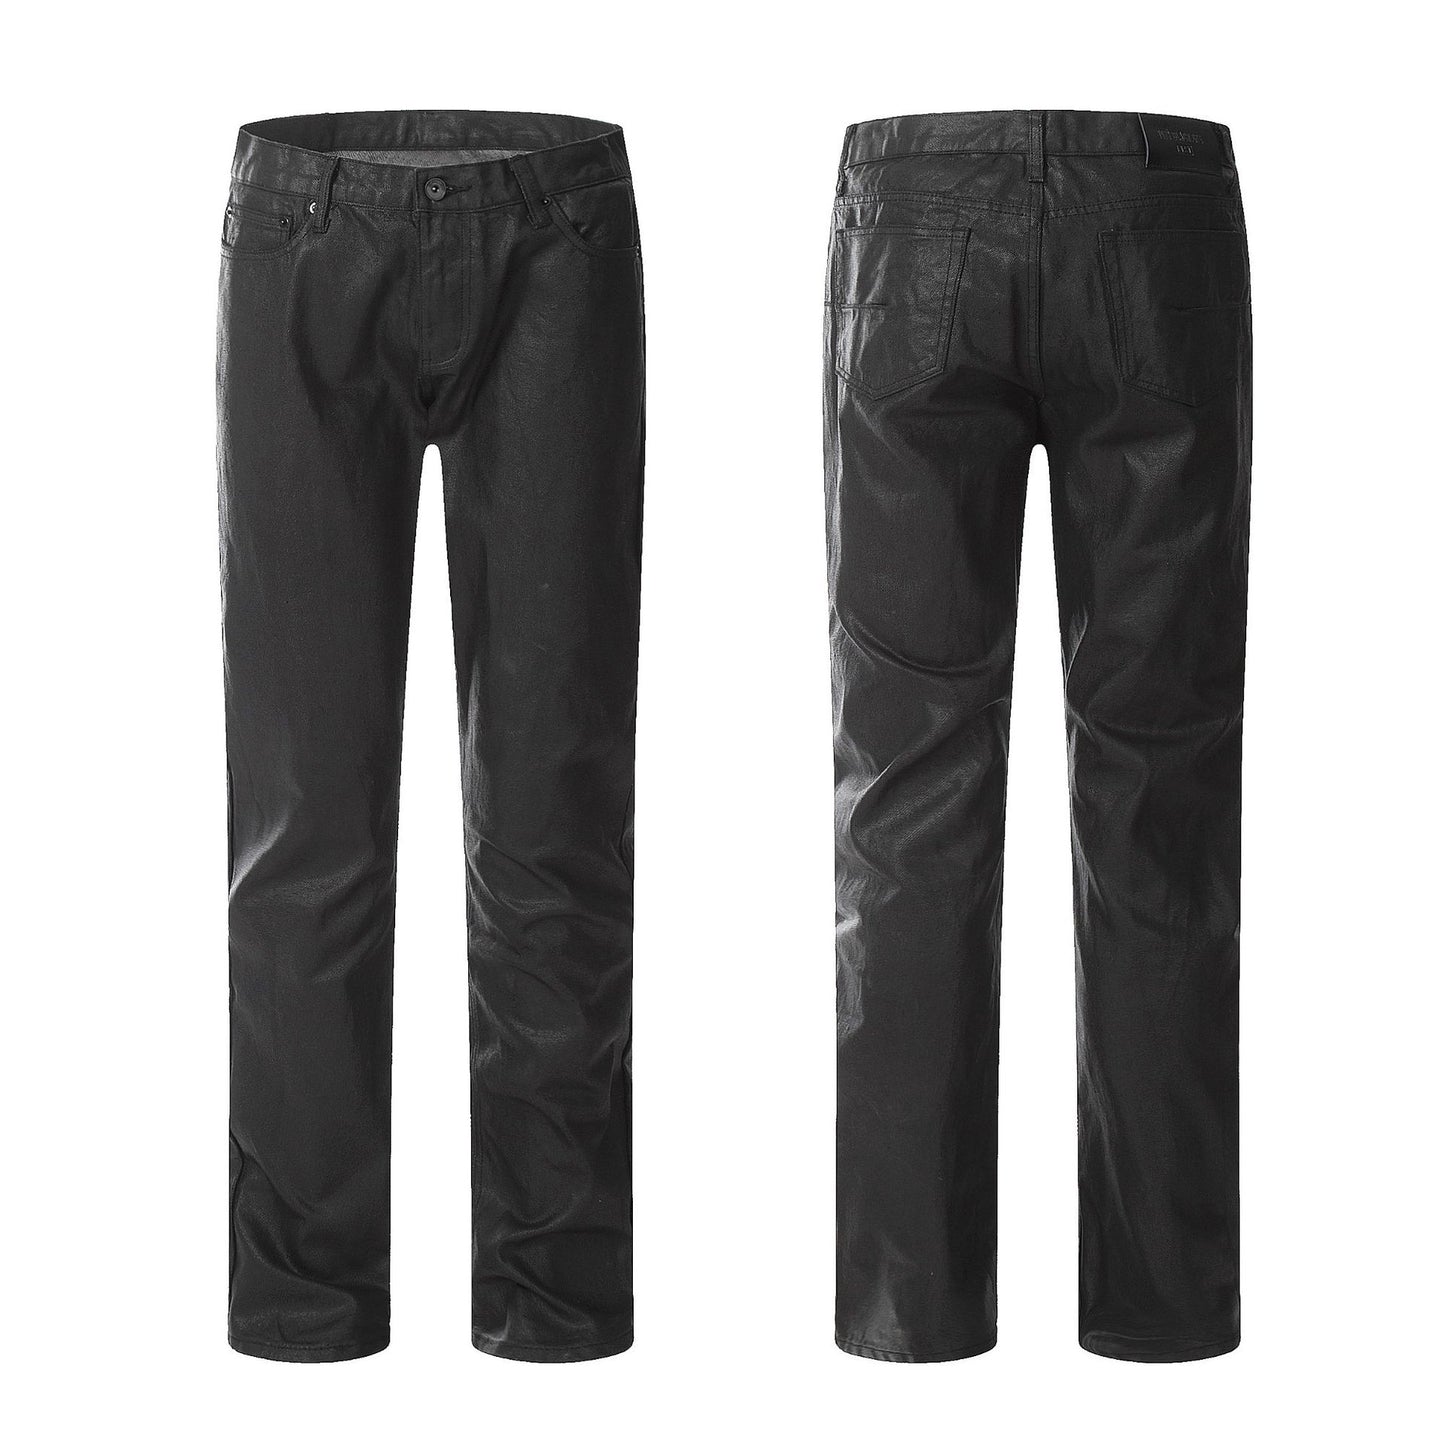 Waterproof Tactical Pants Straight Black Washed Jeans